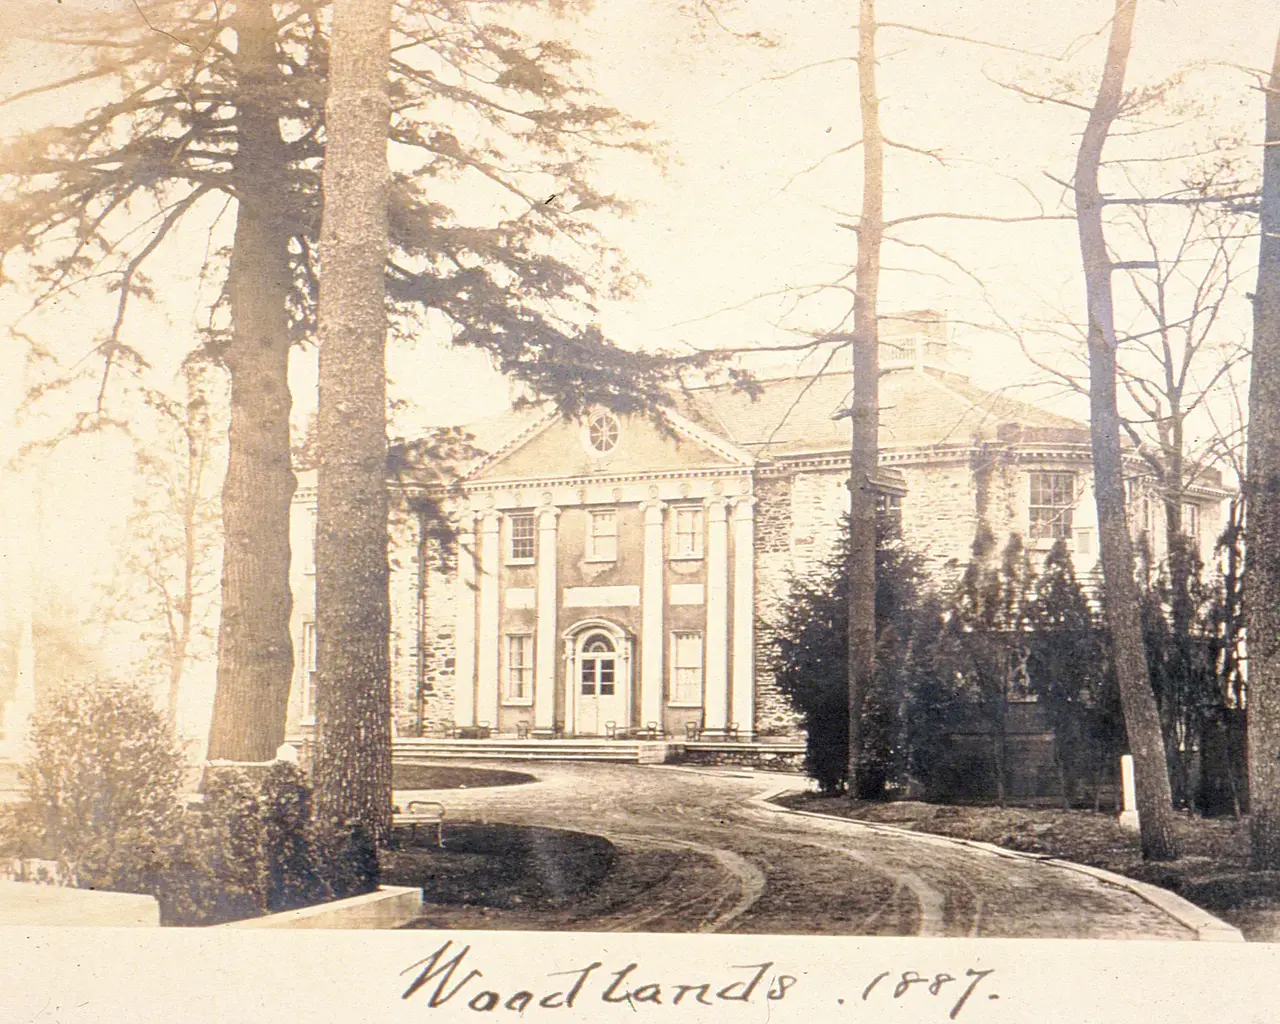 The Woodlands Trust for Historic Preservation, view of the Hamilton Mansion from the Northwest, 1887.